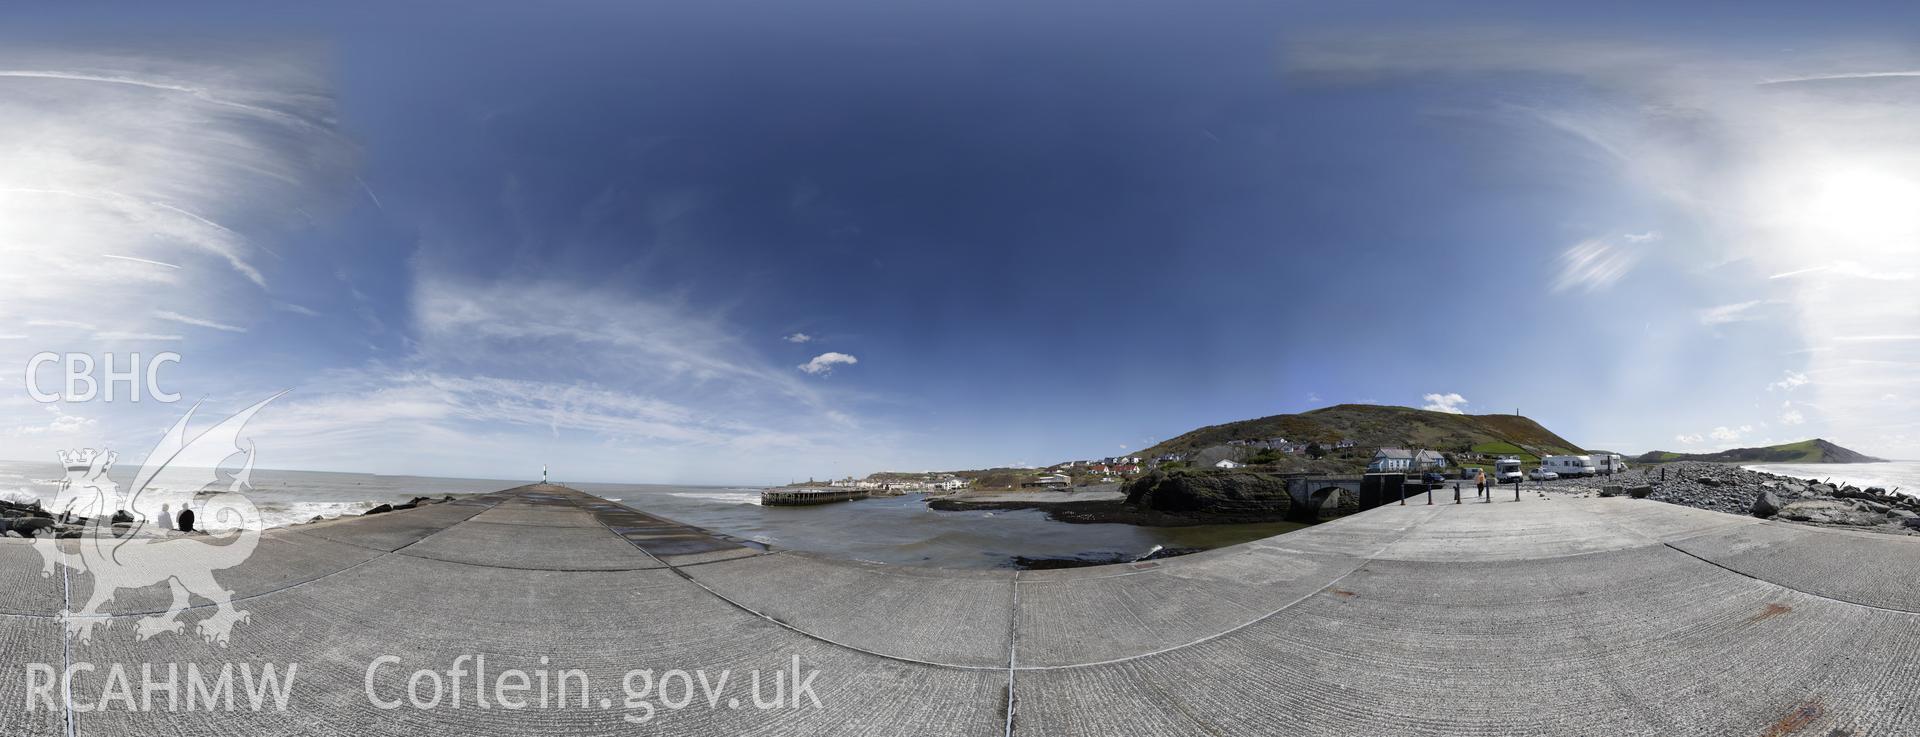 Reduced resolution tiff of stitched images from the Jetty to the Harbour, Aberystwyth produced by Susan Fielding and Rita Singer, 2018. Produced through European Travellers to Wales project.